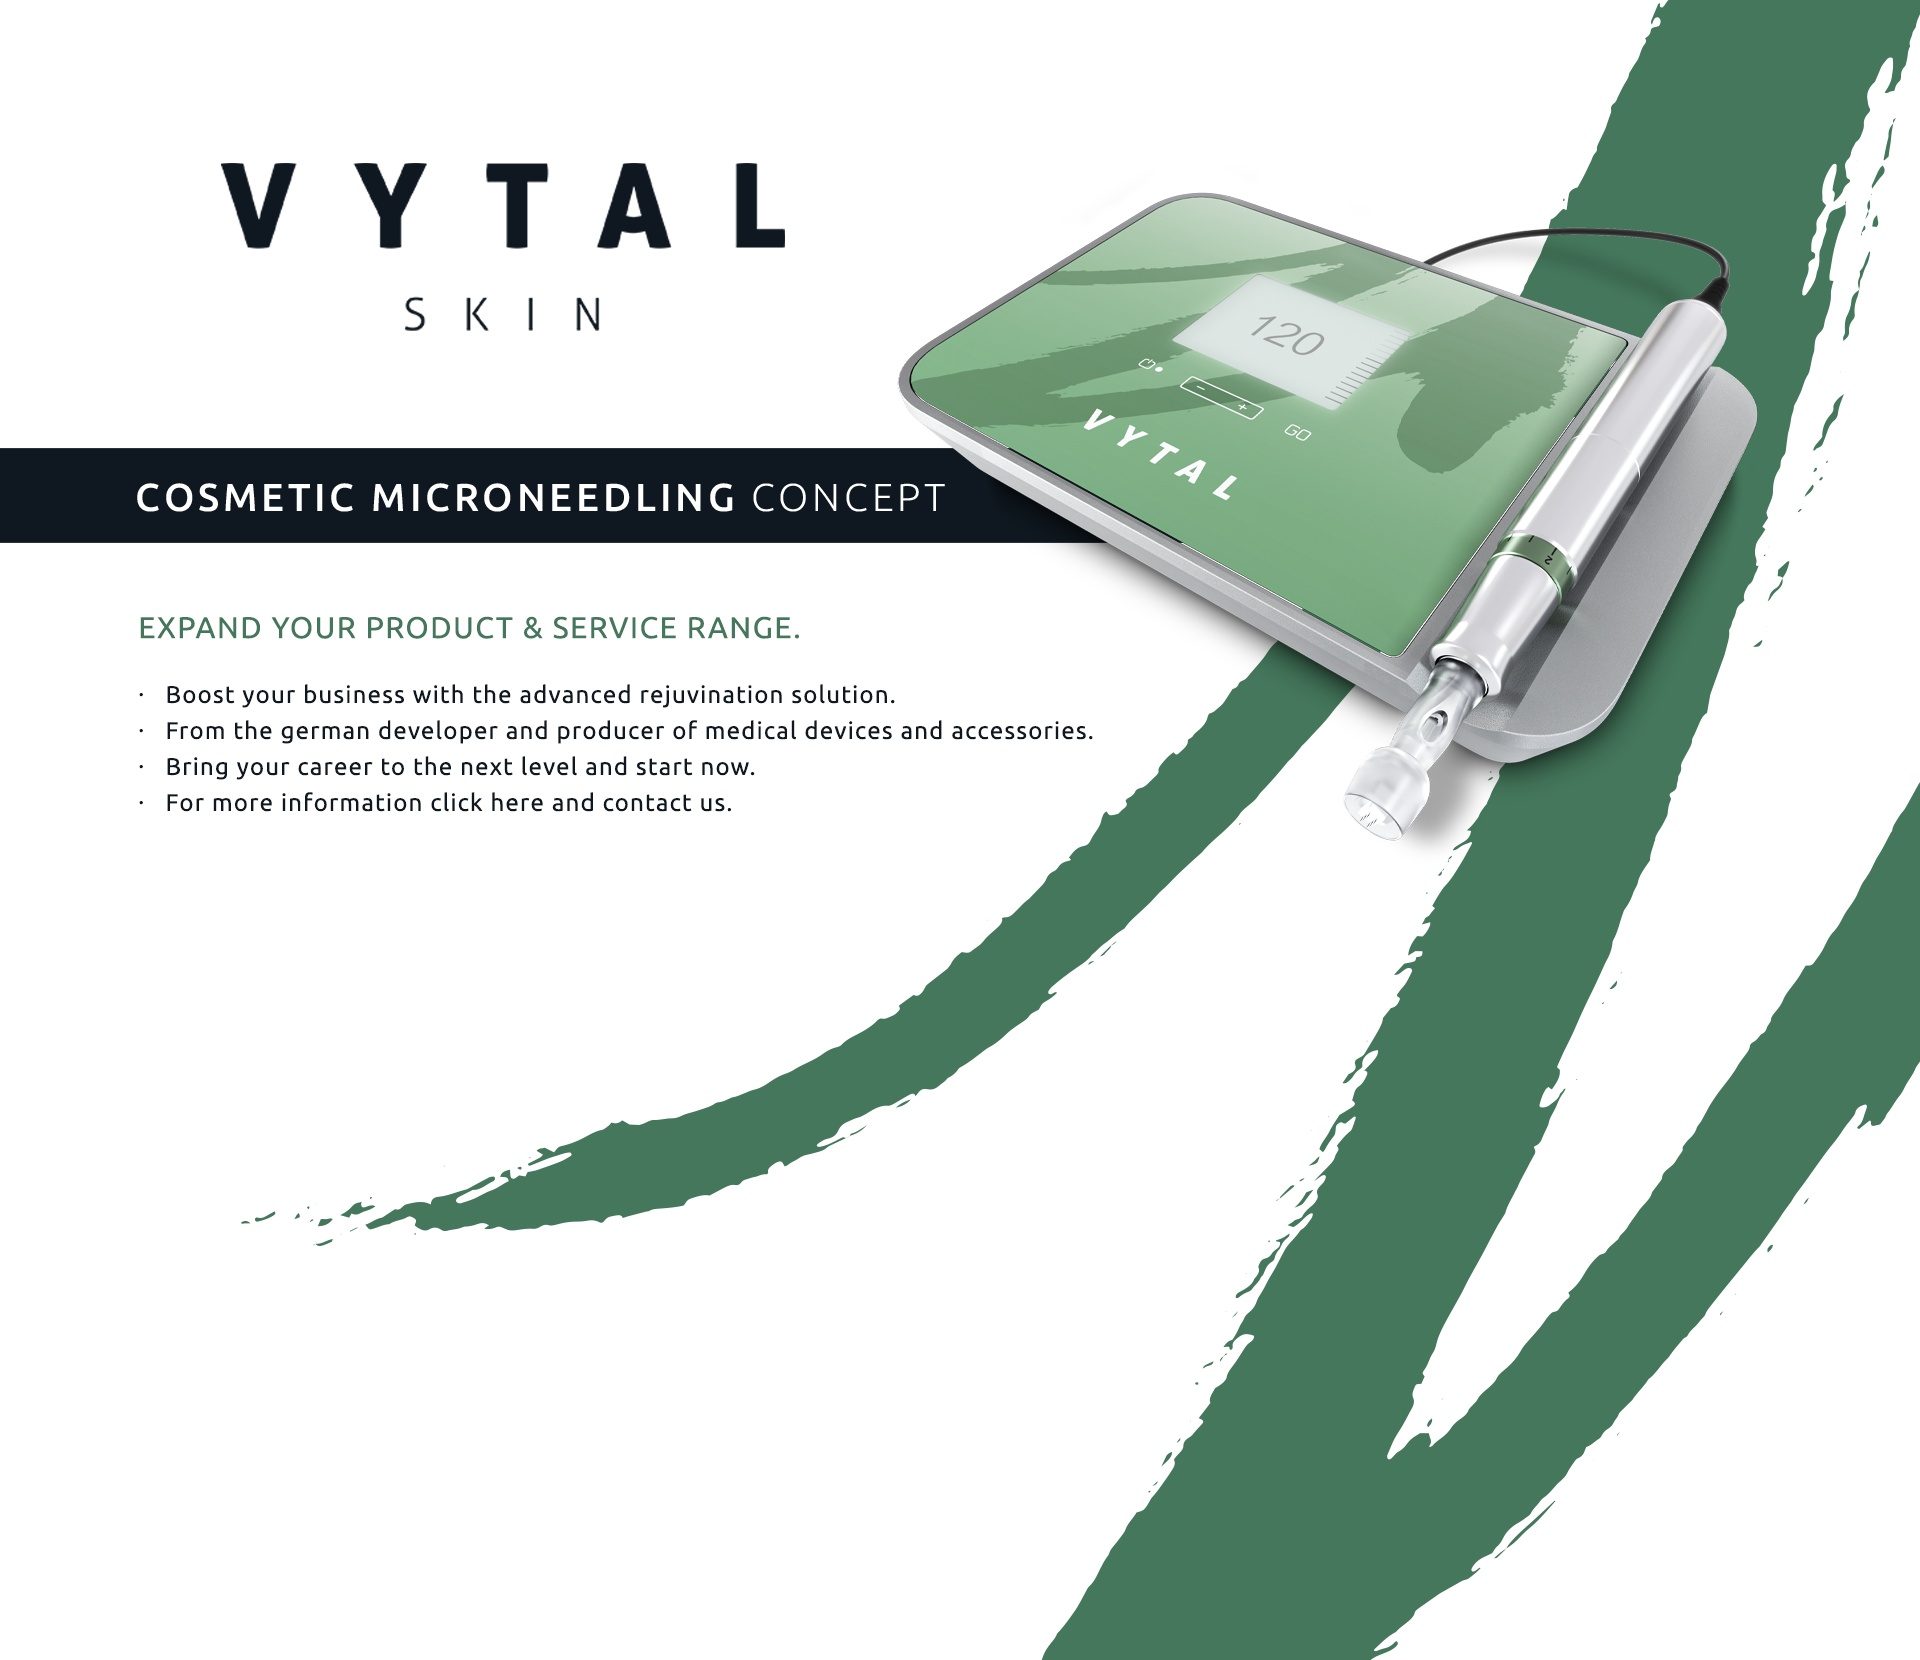 VYTAL SKIN - Cosmetic microneedling concept. Expand your product and service range. Boost your business with the advanced rejuvination solution. From the German developer and producer of medical devices and accessories. Bring your career to the next level and start now. For more information click here and contact us.